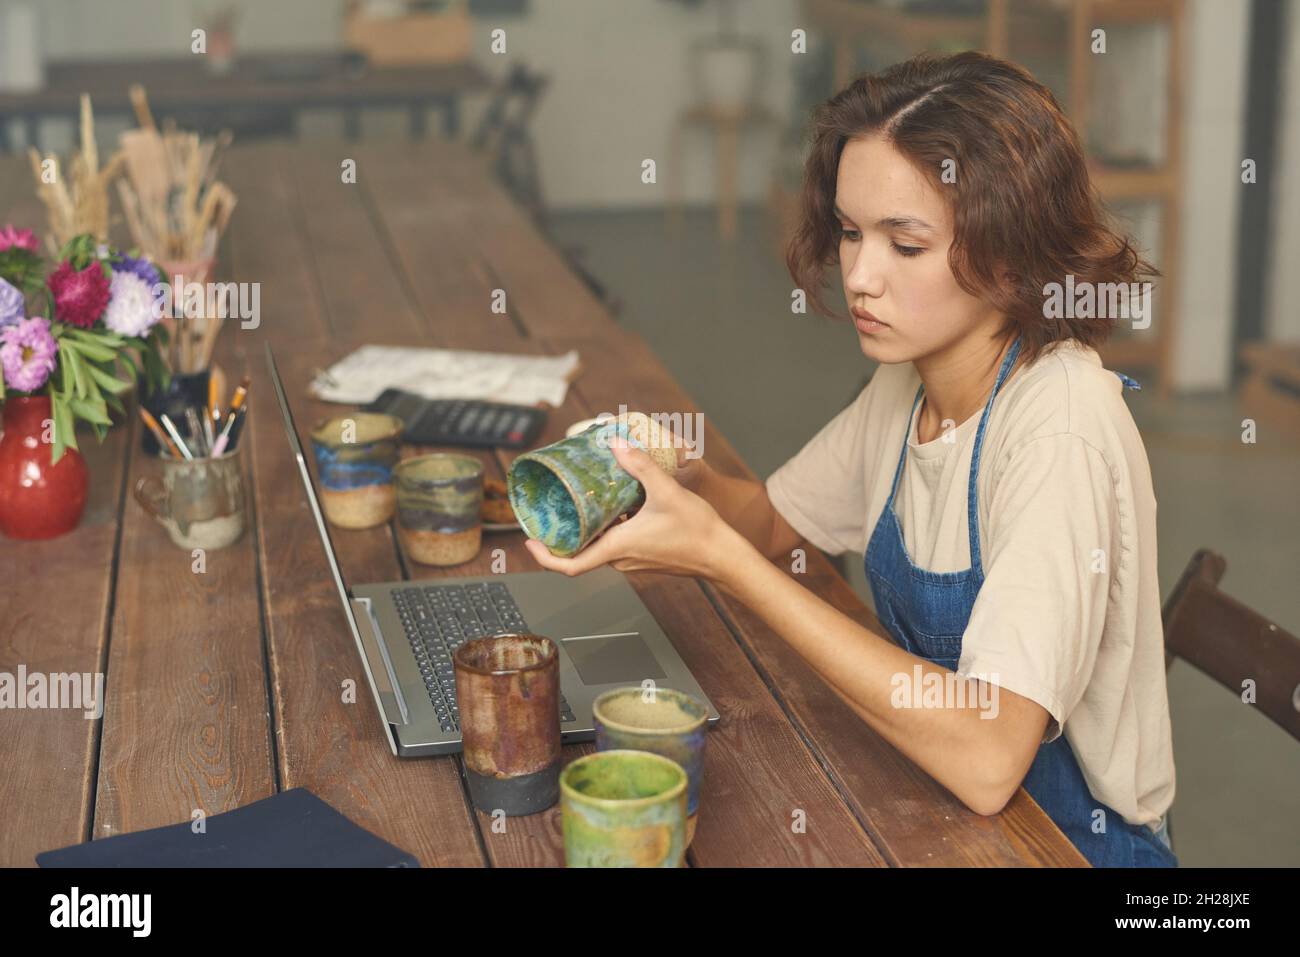 Serious young Caucasian woman sitting at wooden table with laptop and examining ceramic mug in pottery workshop Stock Photo